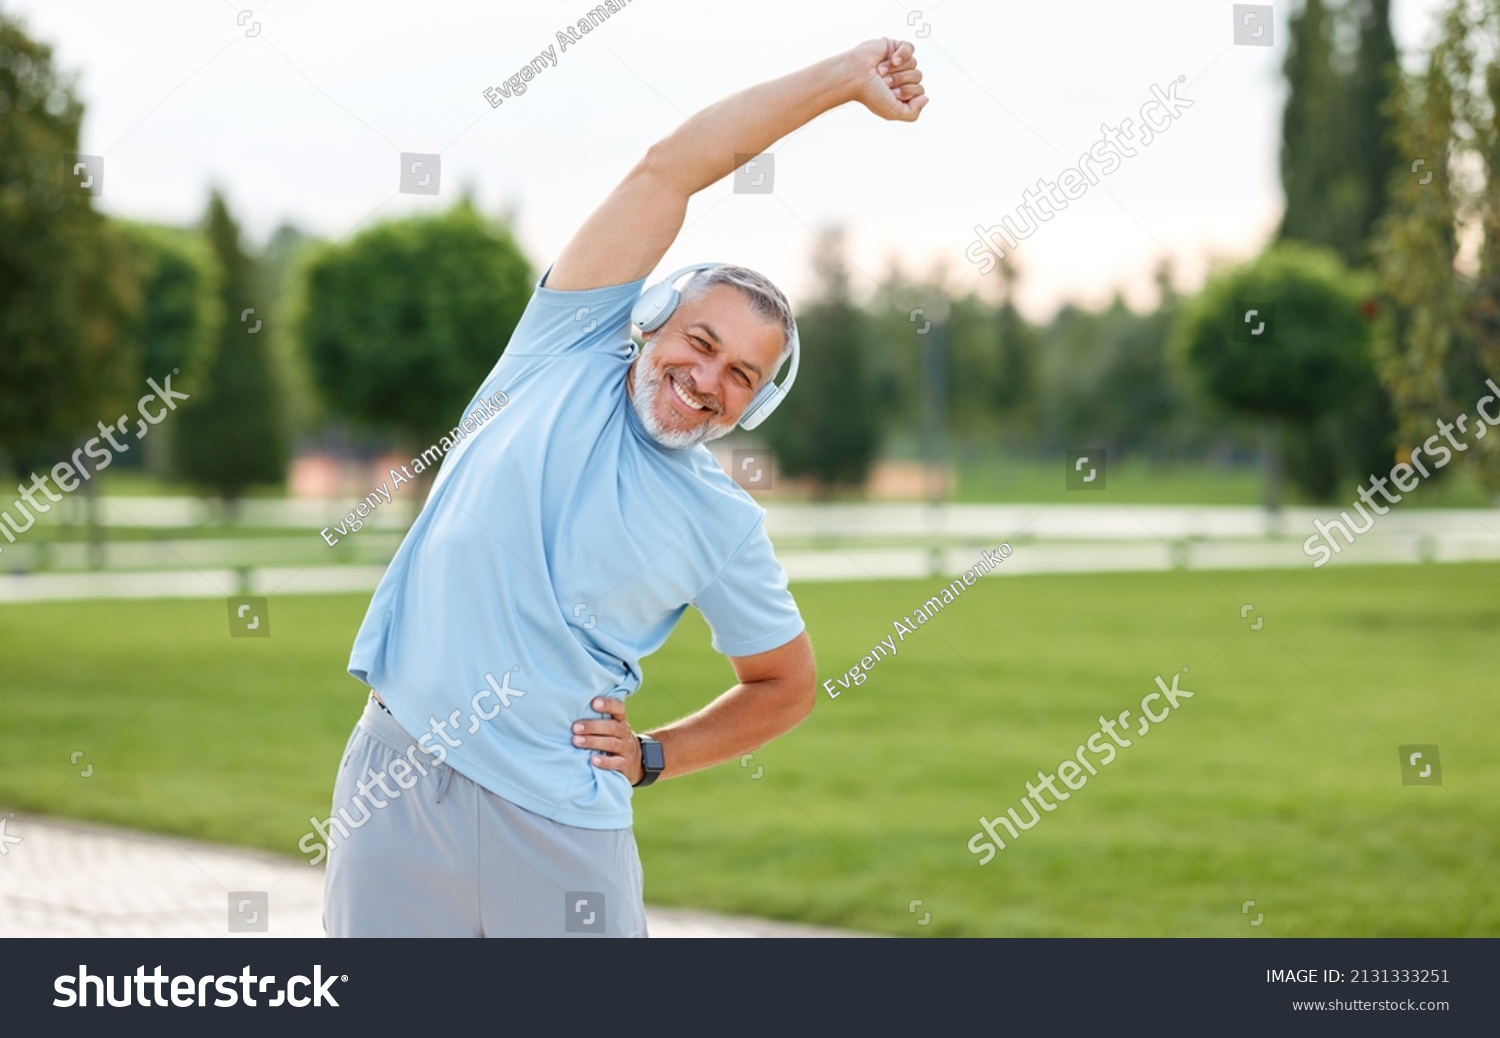 Staying active after retirement. Happy joyful mature retired sportsman wearing headphones and sportswear doing side stretching exercises with arm over his head, exercising outside in city park #2131333251